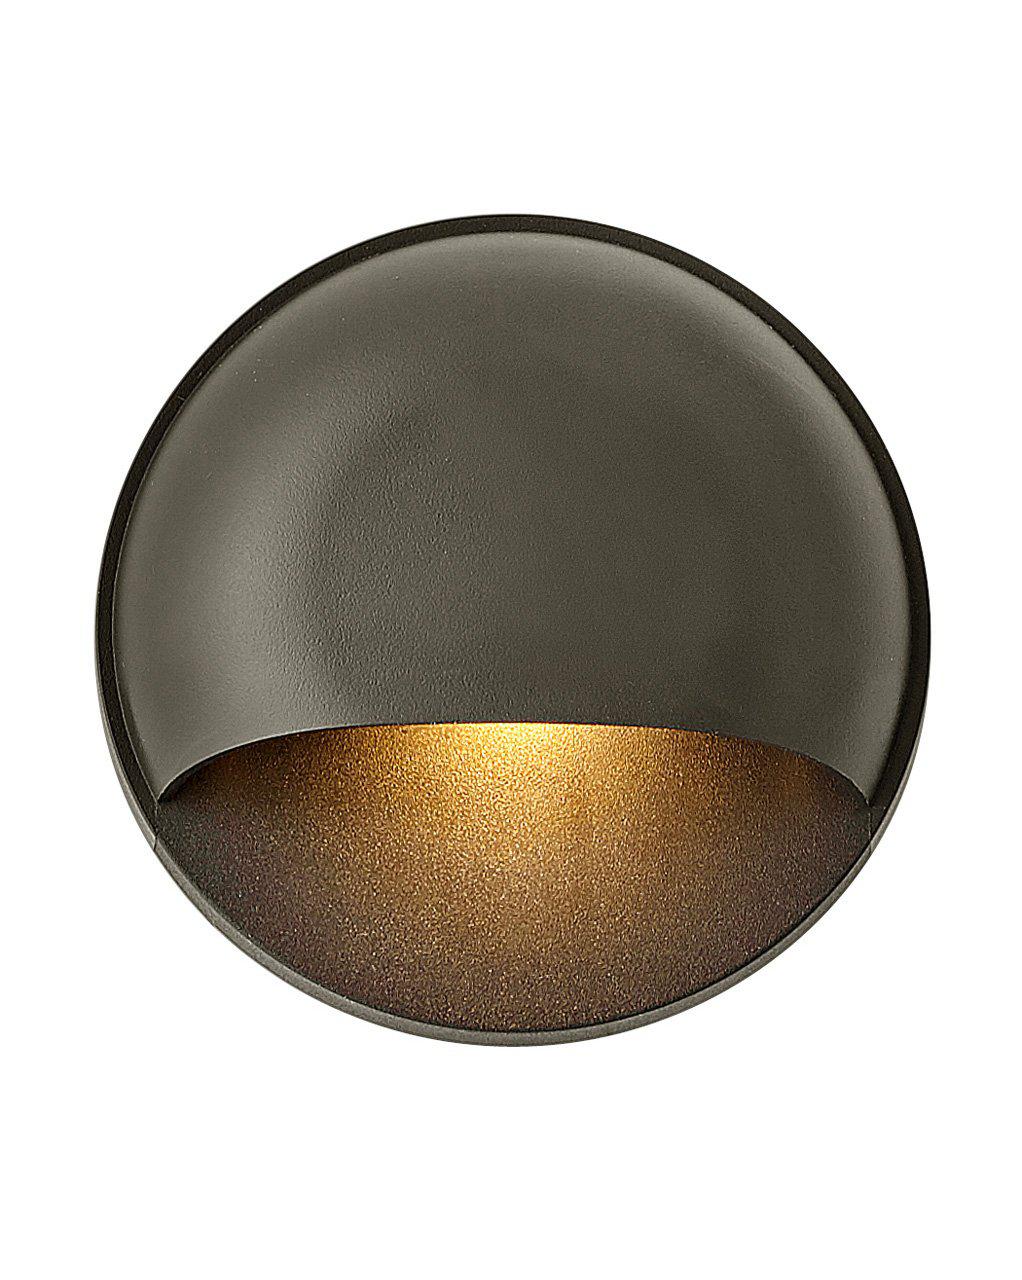 Hinkley Nuvi Round Deck Sconce